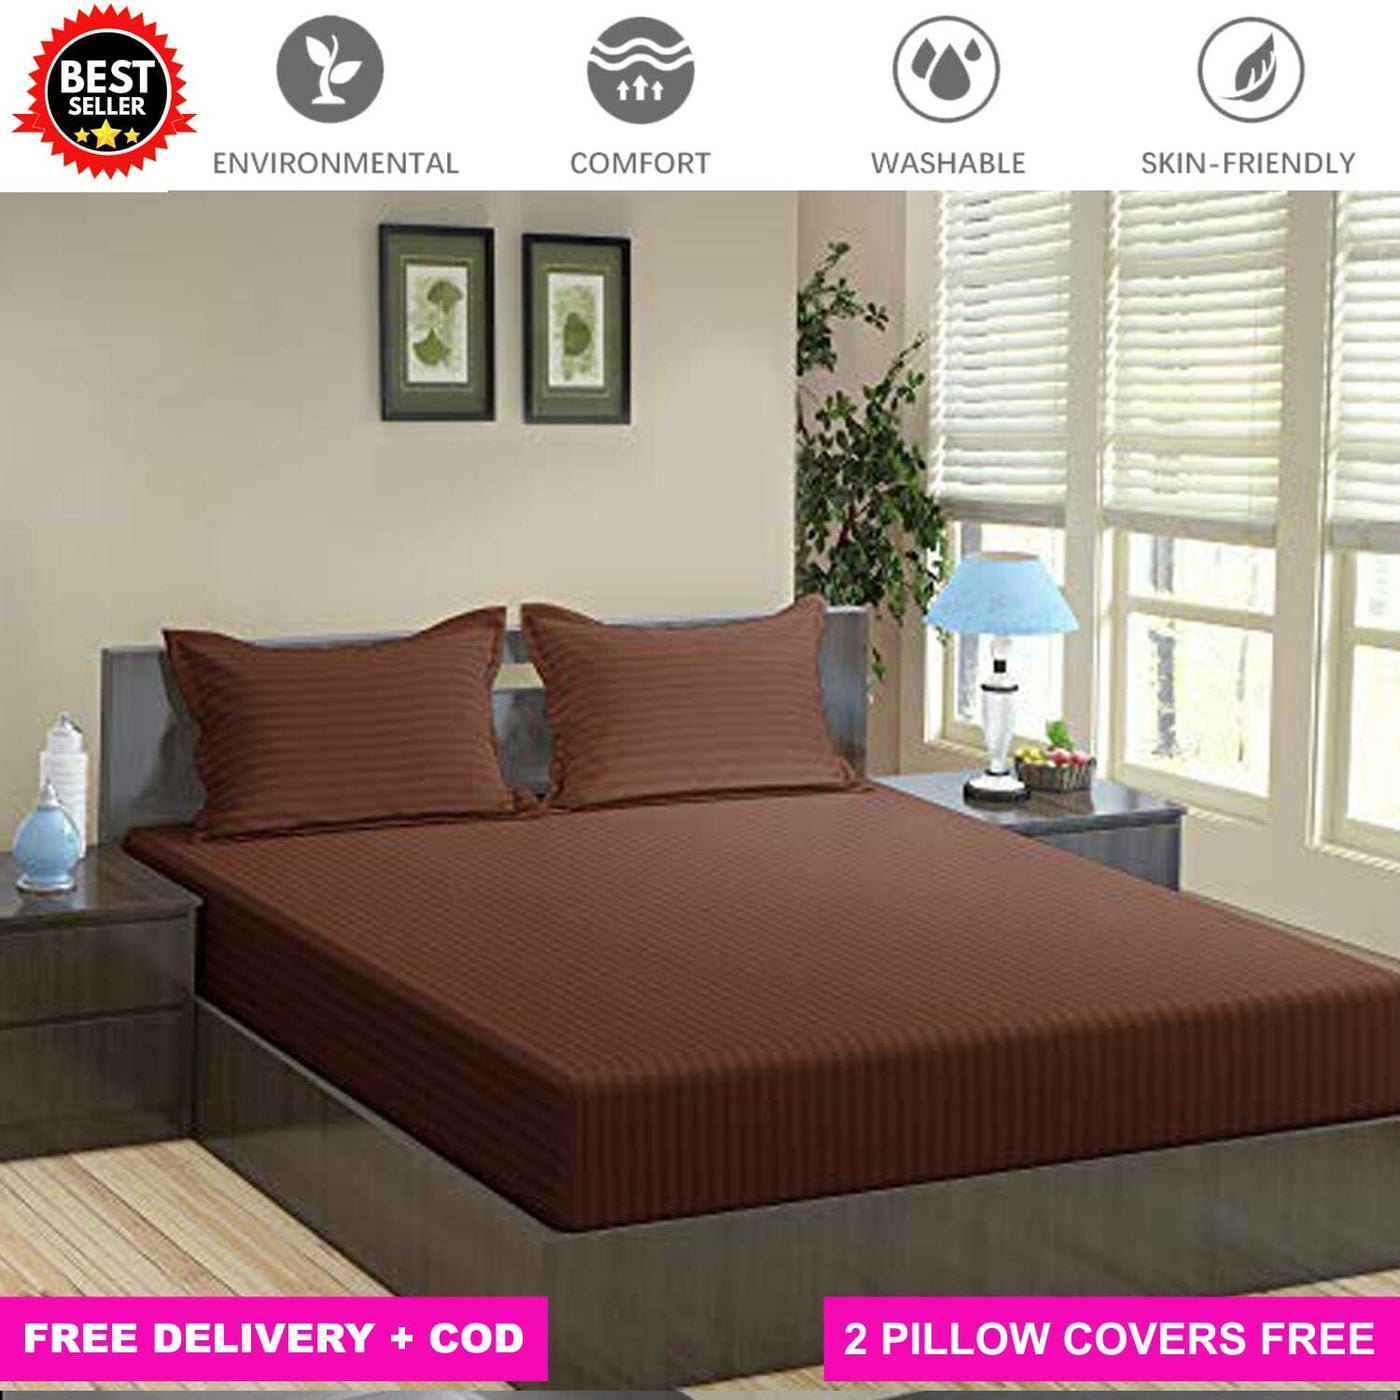 Chocolate Brown Full Elastic Fitted Bedsheet with 2 Pillow Covers Bed Sheets Great Happy IN KING SIZE - ₹1299 